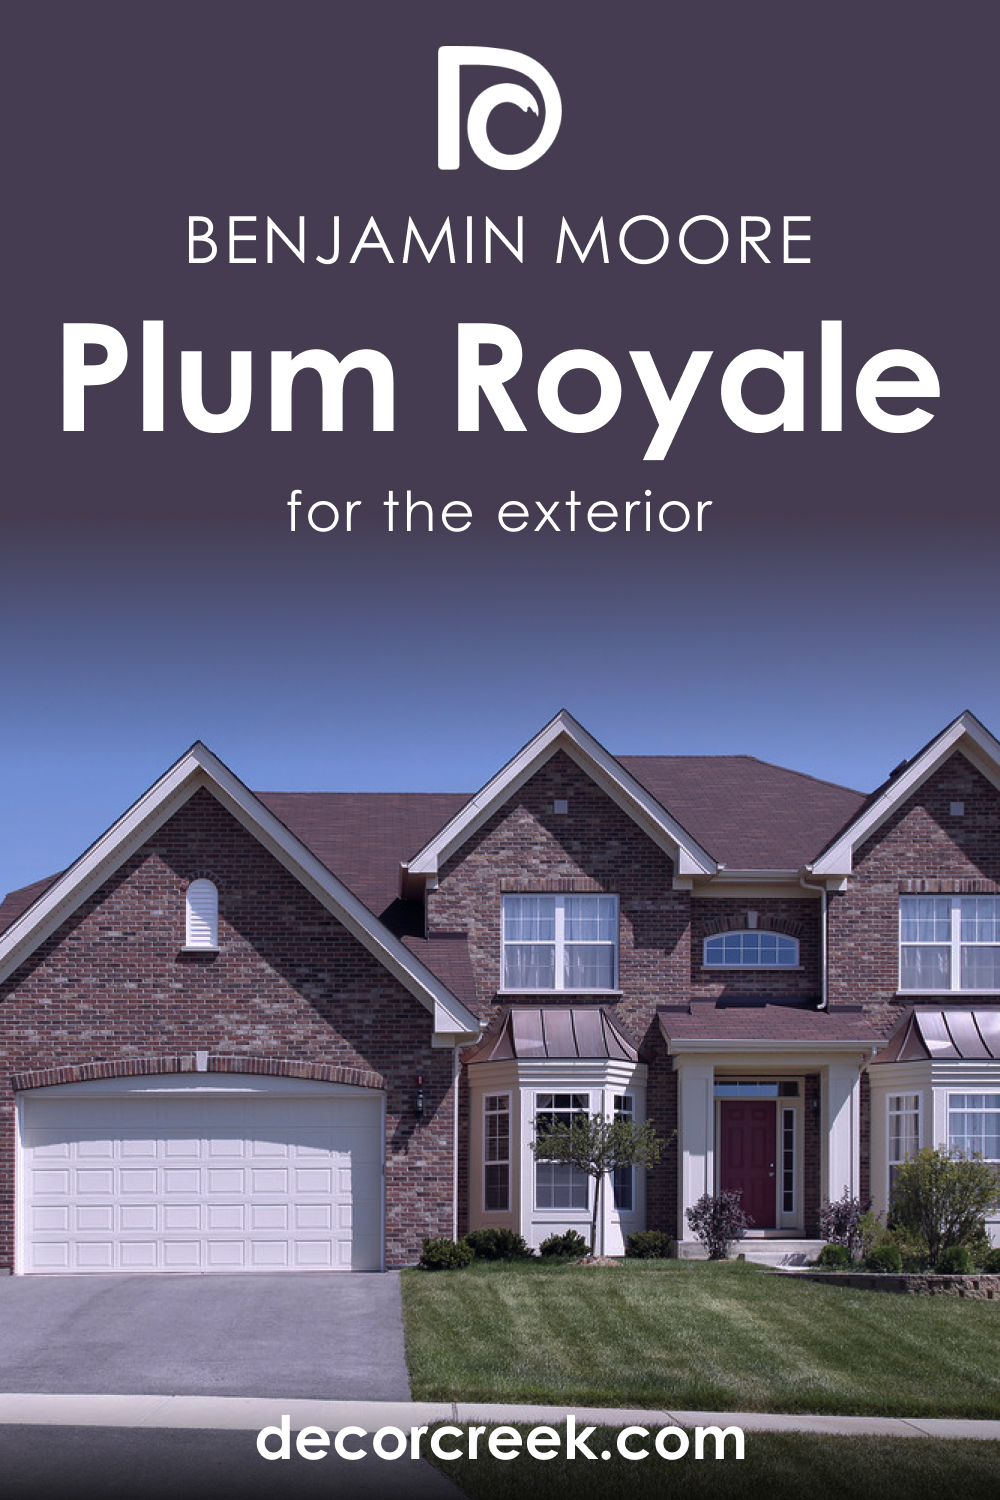 How to Use Plum Royale 2070-20 for an Exterior?